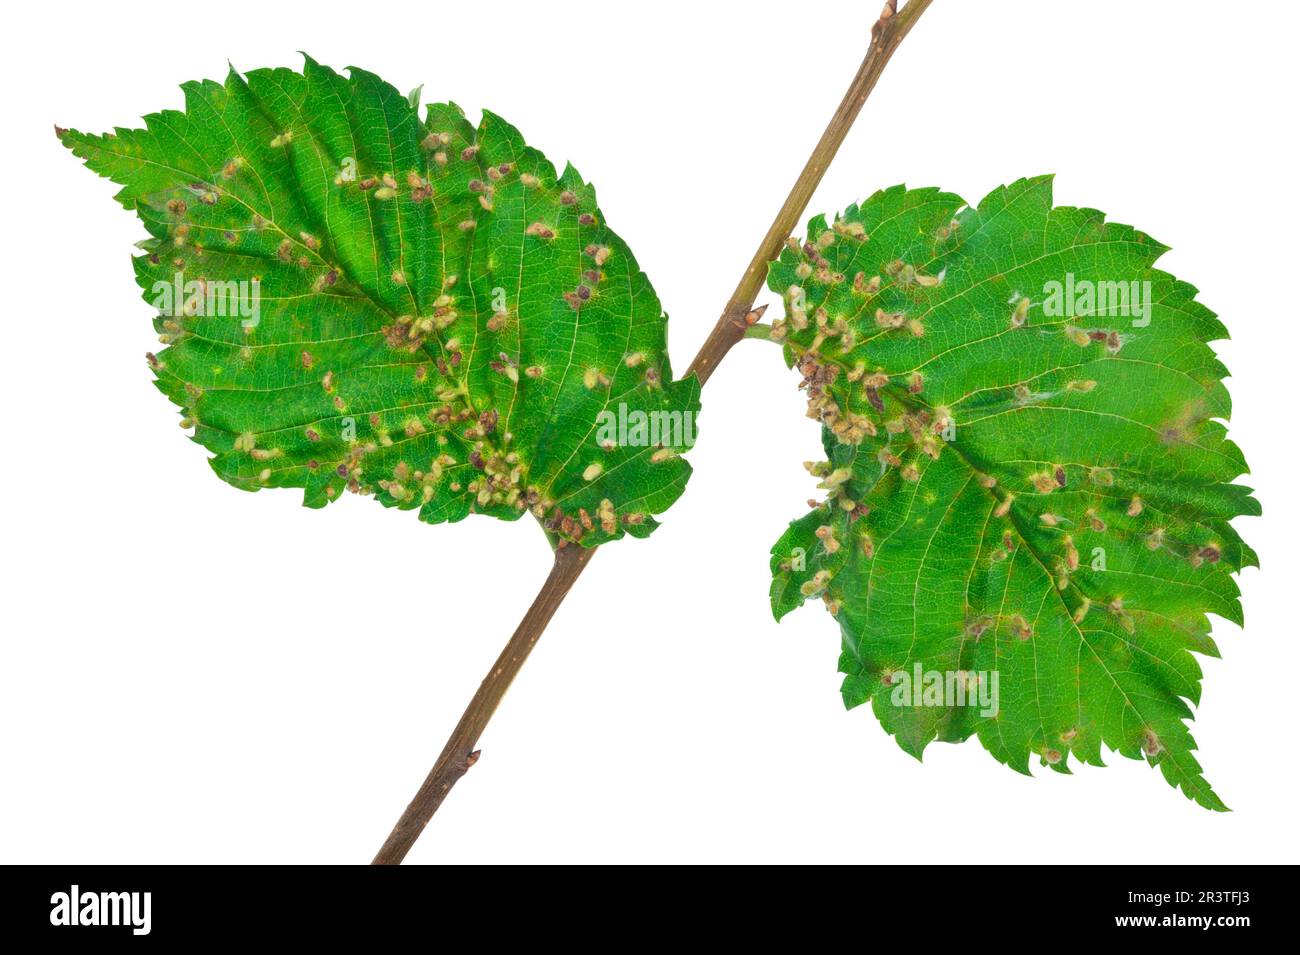 Lime nail gall - Eriophyes tiliae Stock Photo